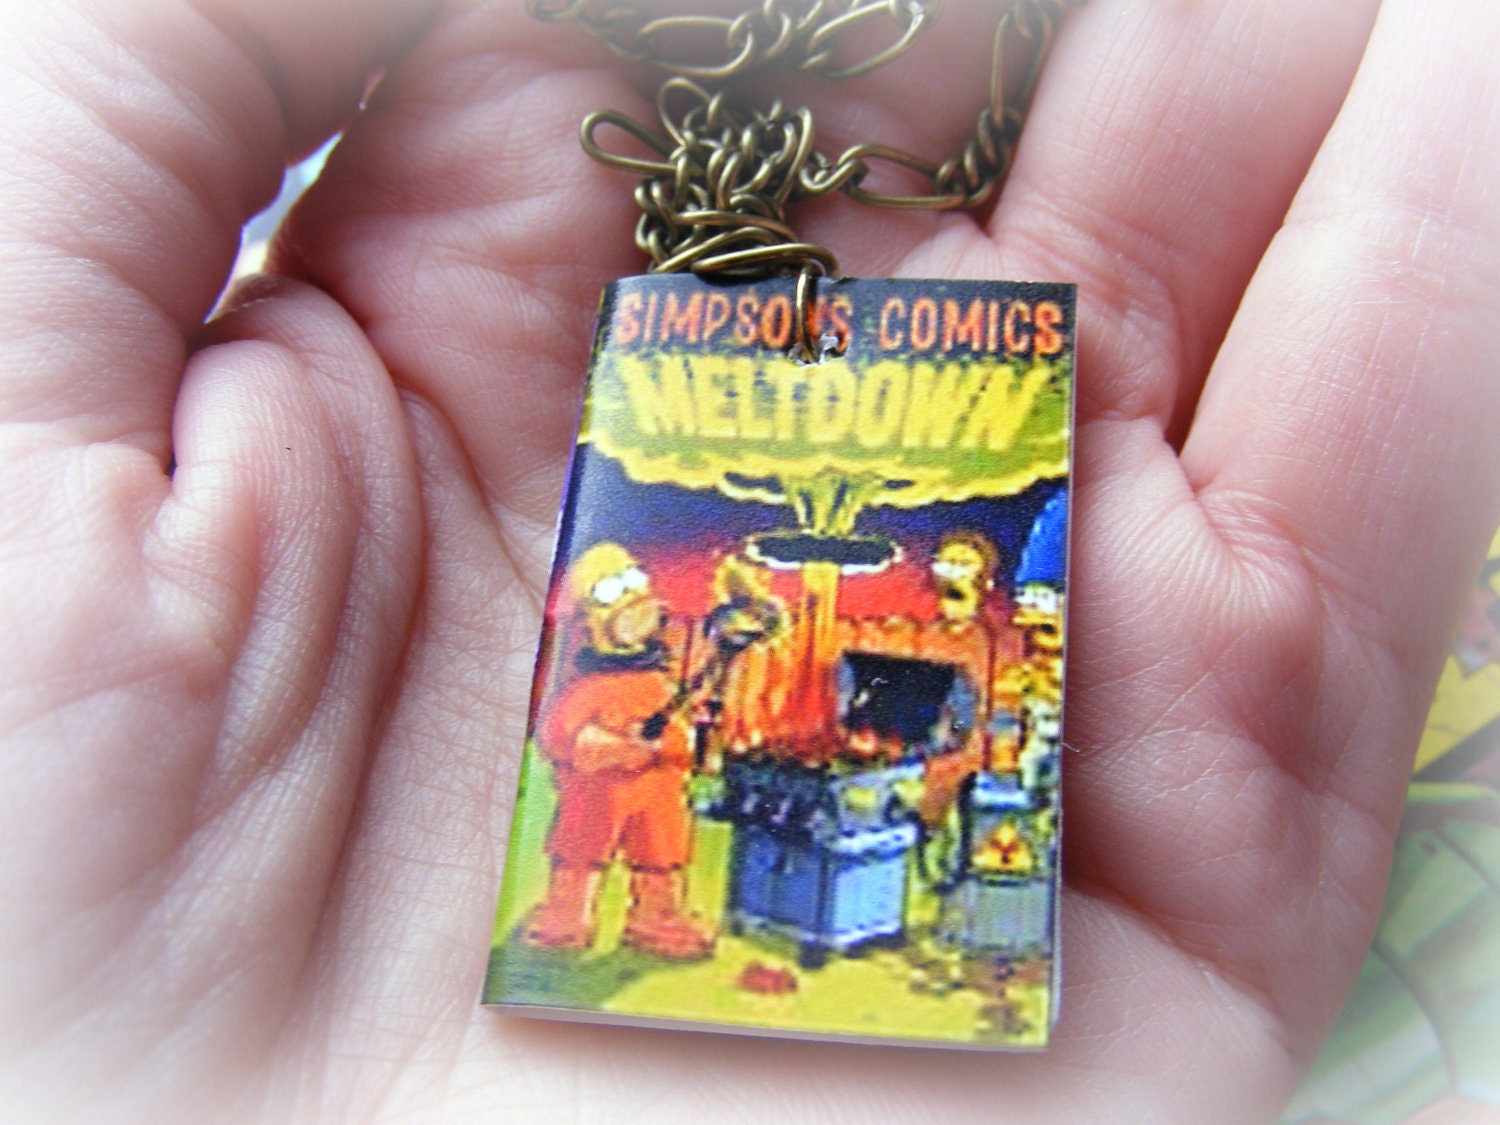 Earrings or Necklace The Simpsons Miniature Comic Book